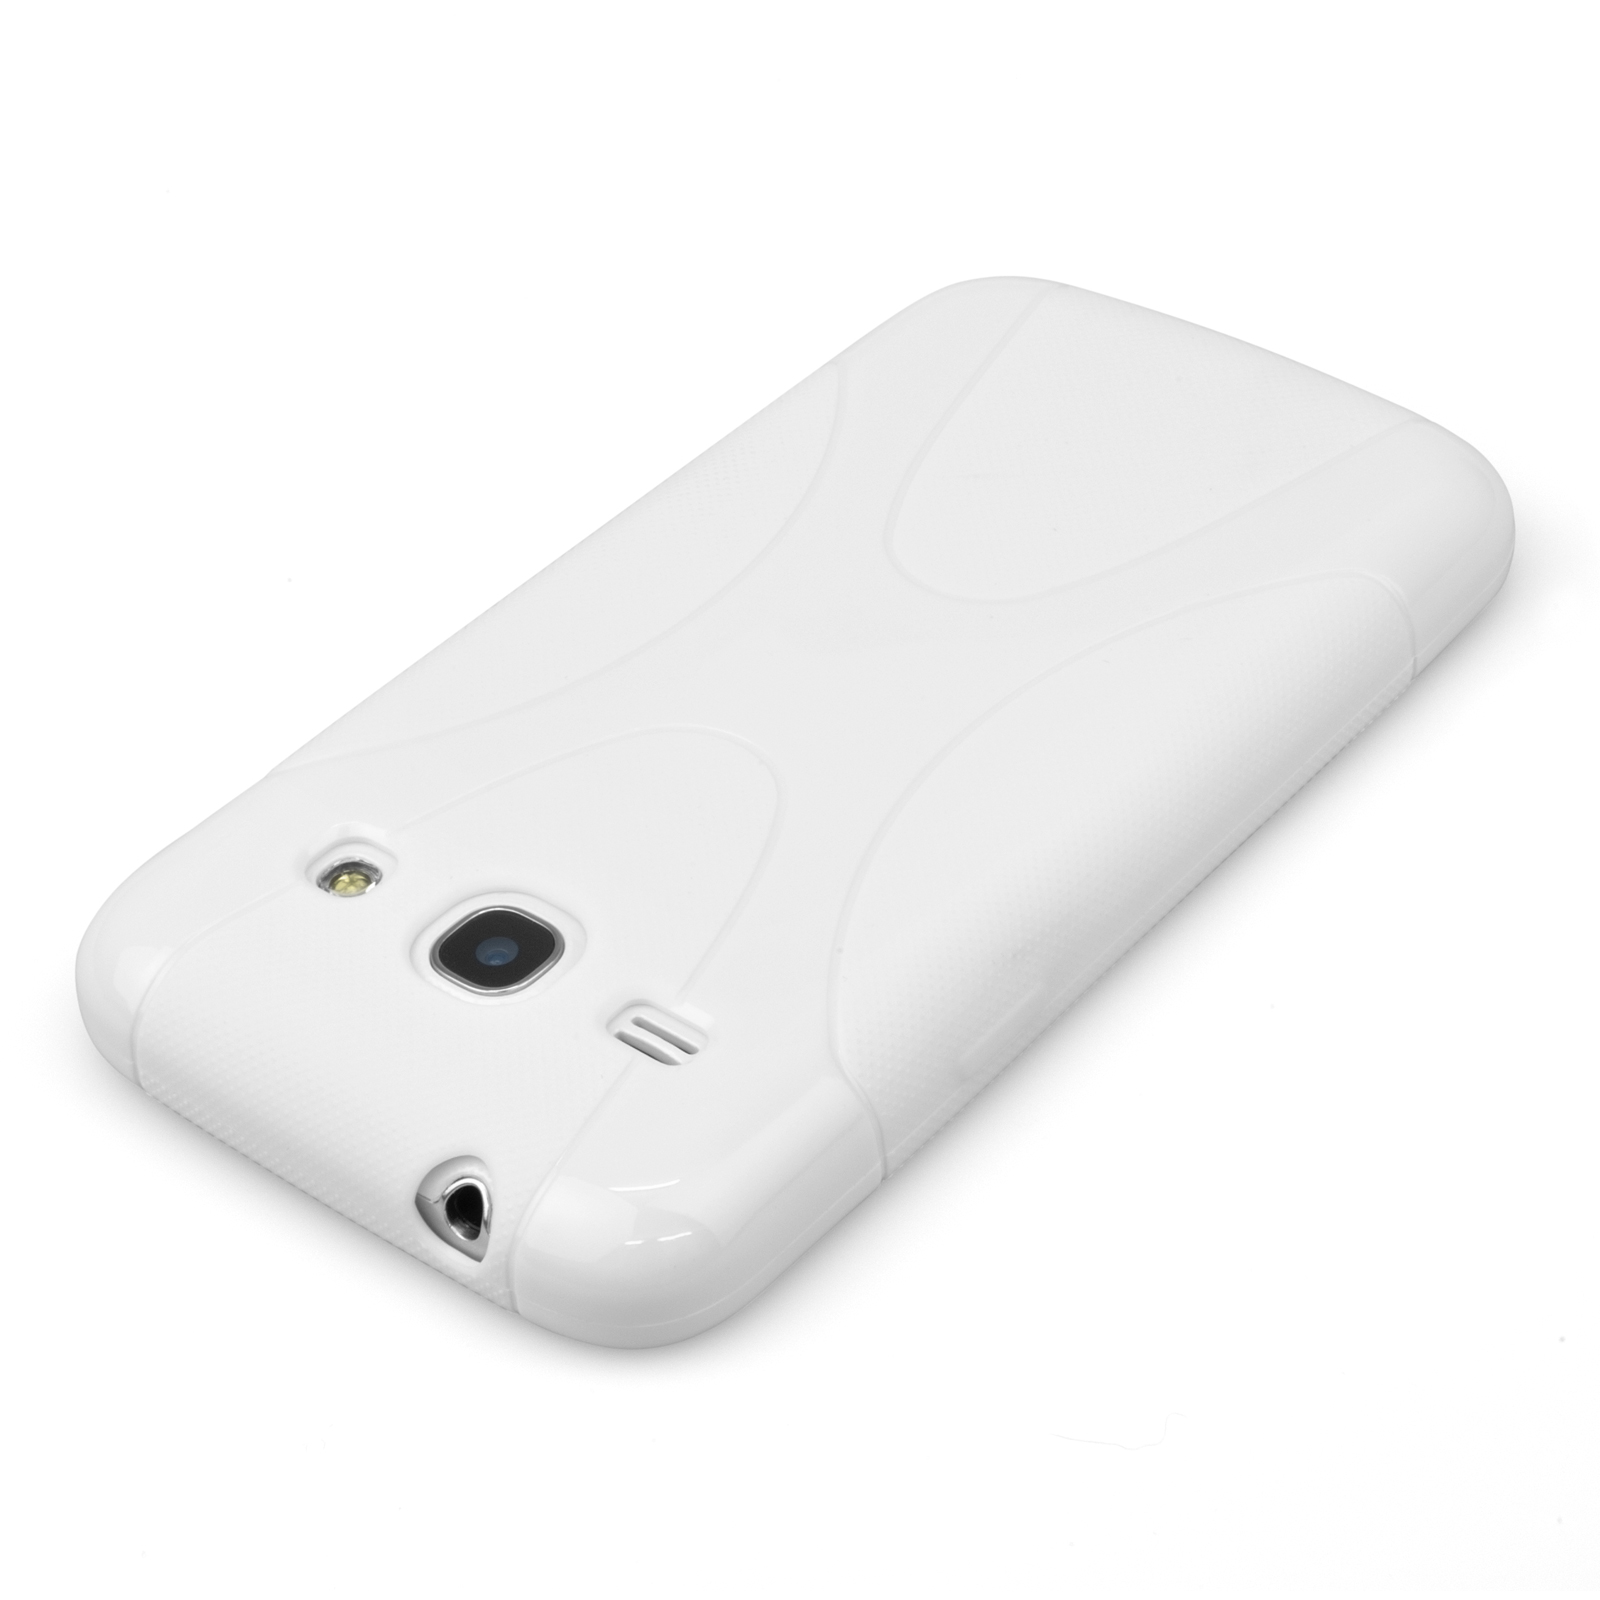 YouSave Samsung Galaxy Core Plus Silicone Gel X-Line Case - White